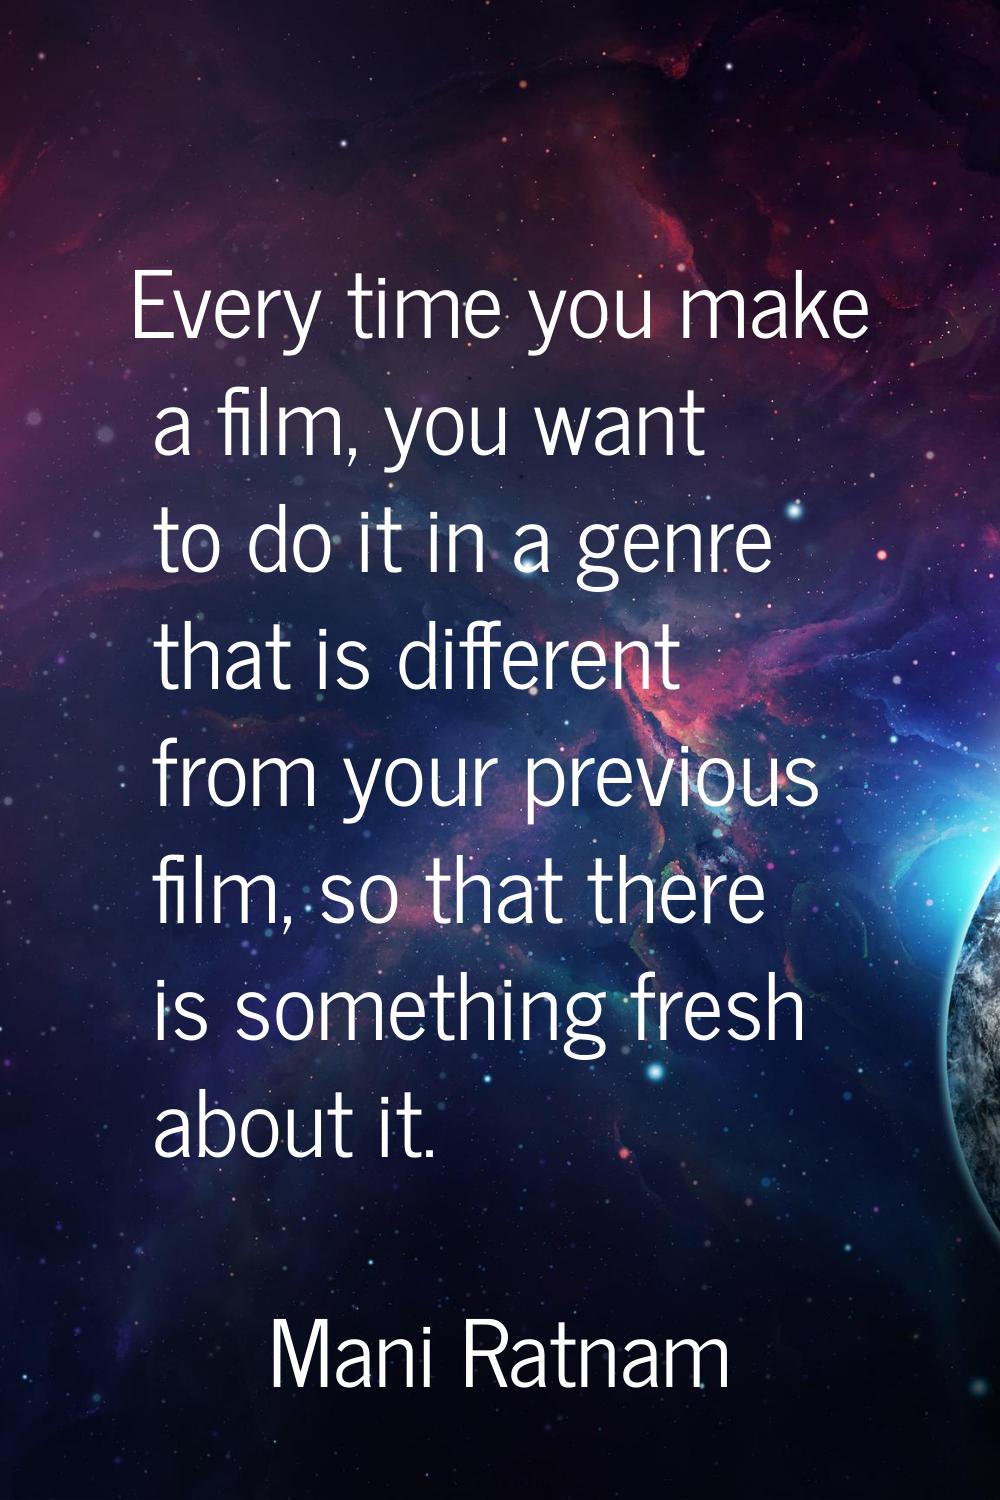 Every time you make a film, you want to do it in a genre that is different from your previous film,